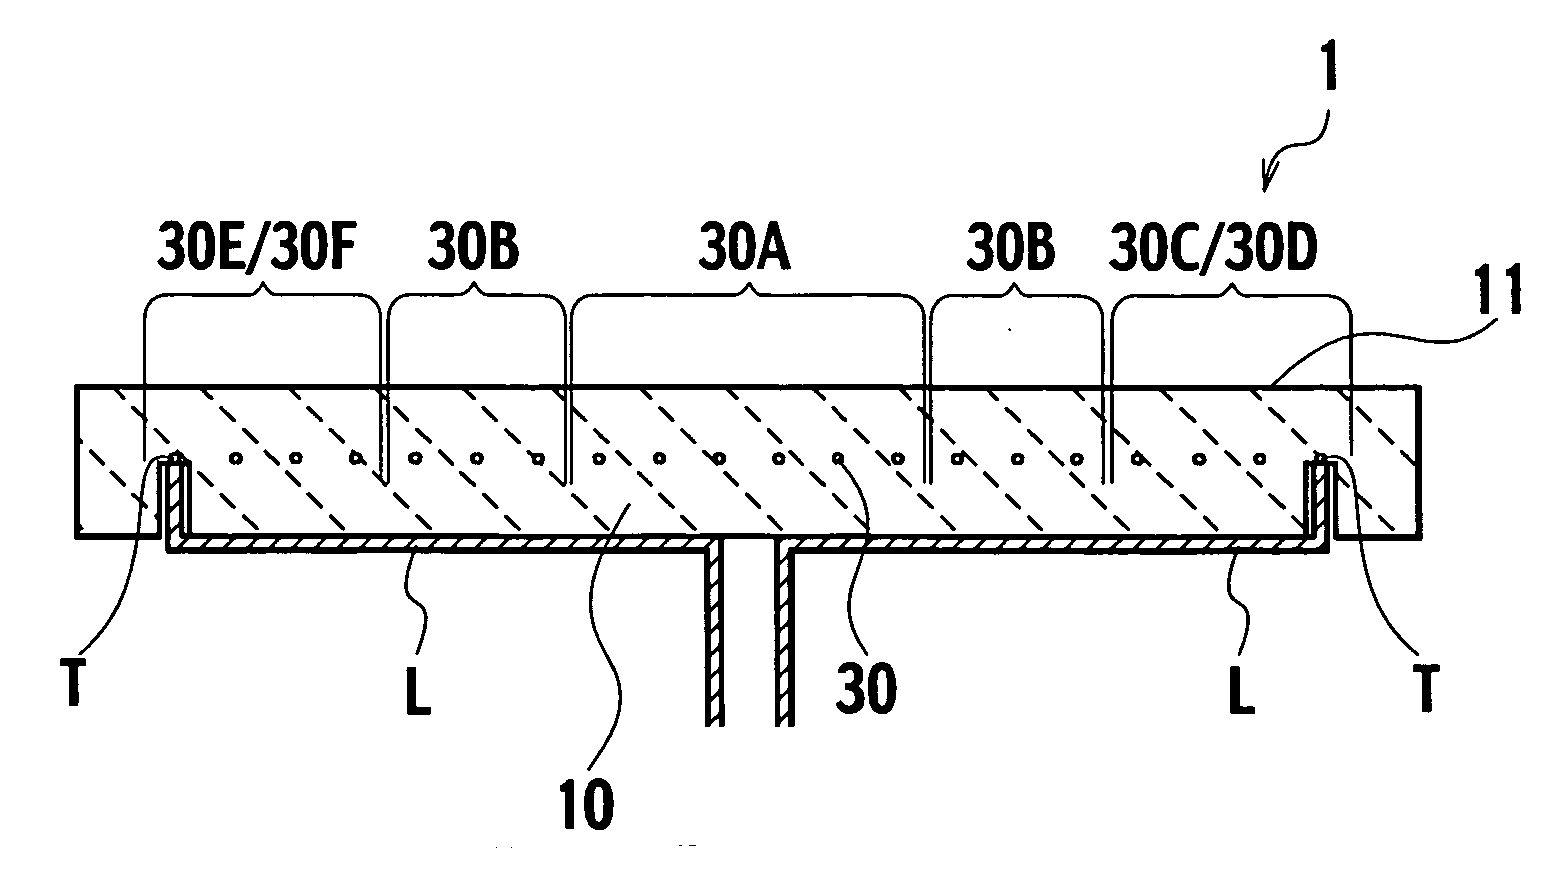 Substrate heating device